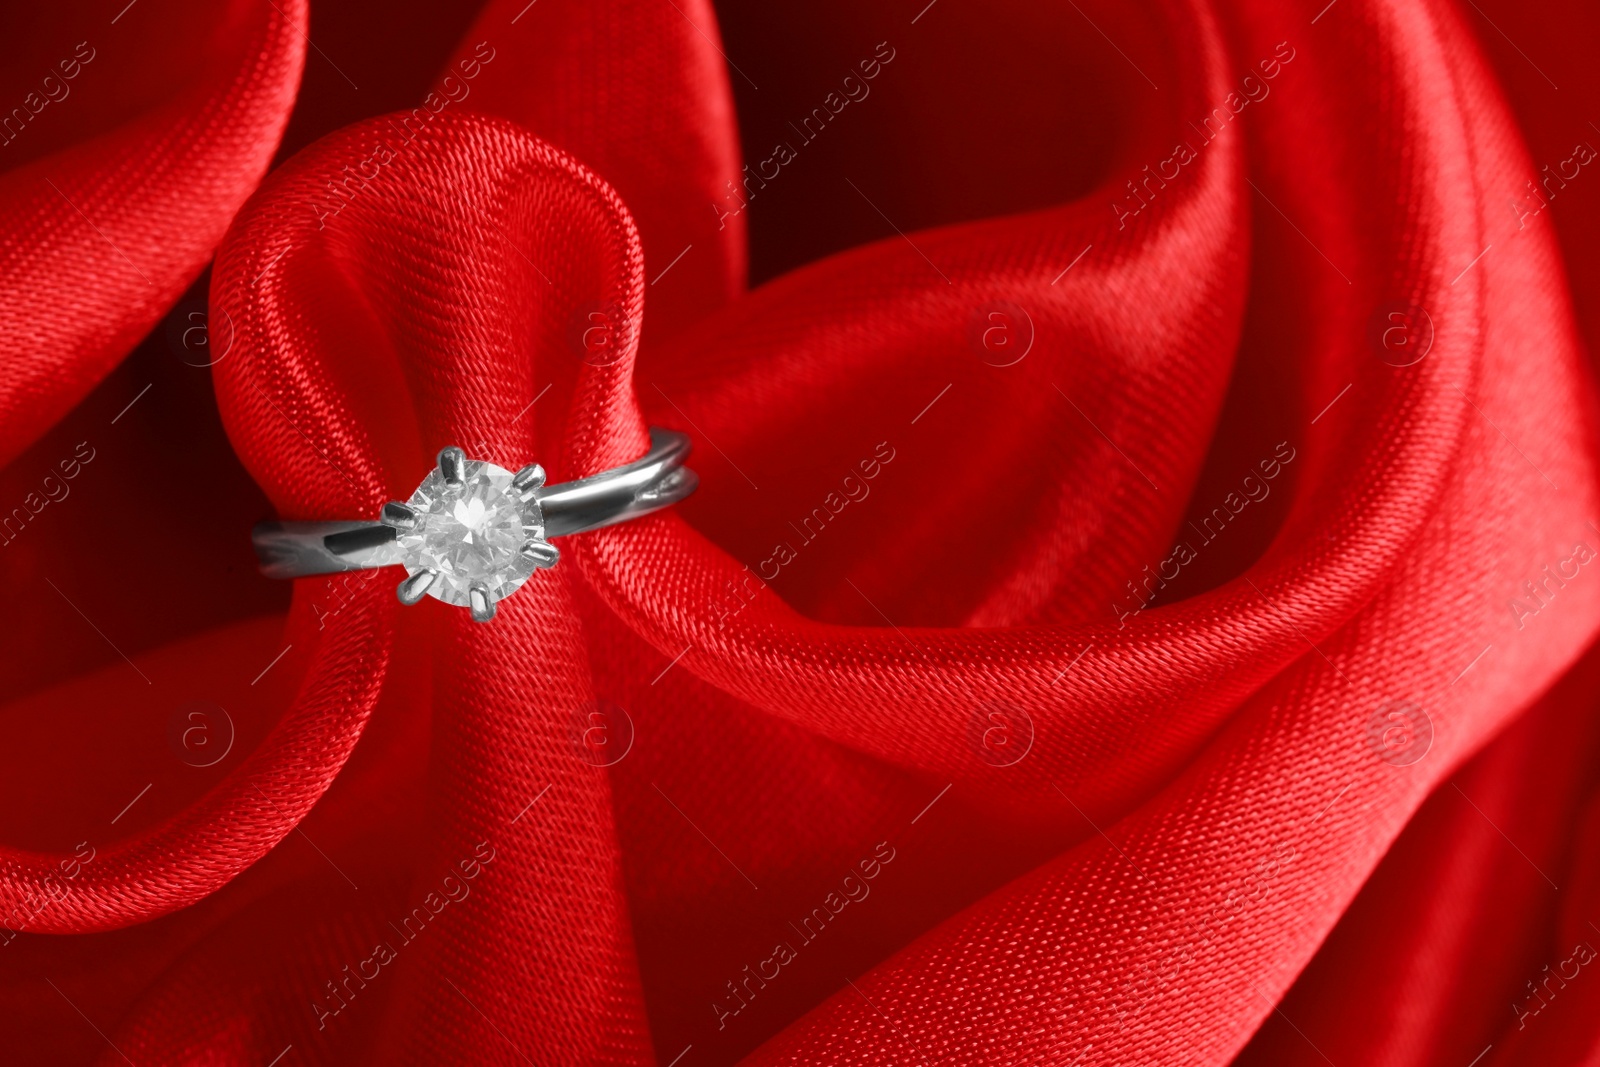 Photo of Beautiful luxury engagement ring with gemstone on red fabric, closeup